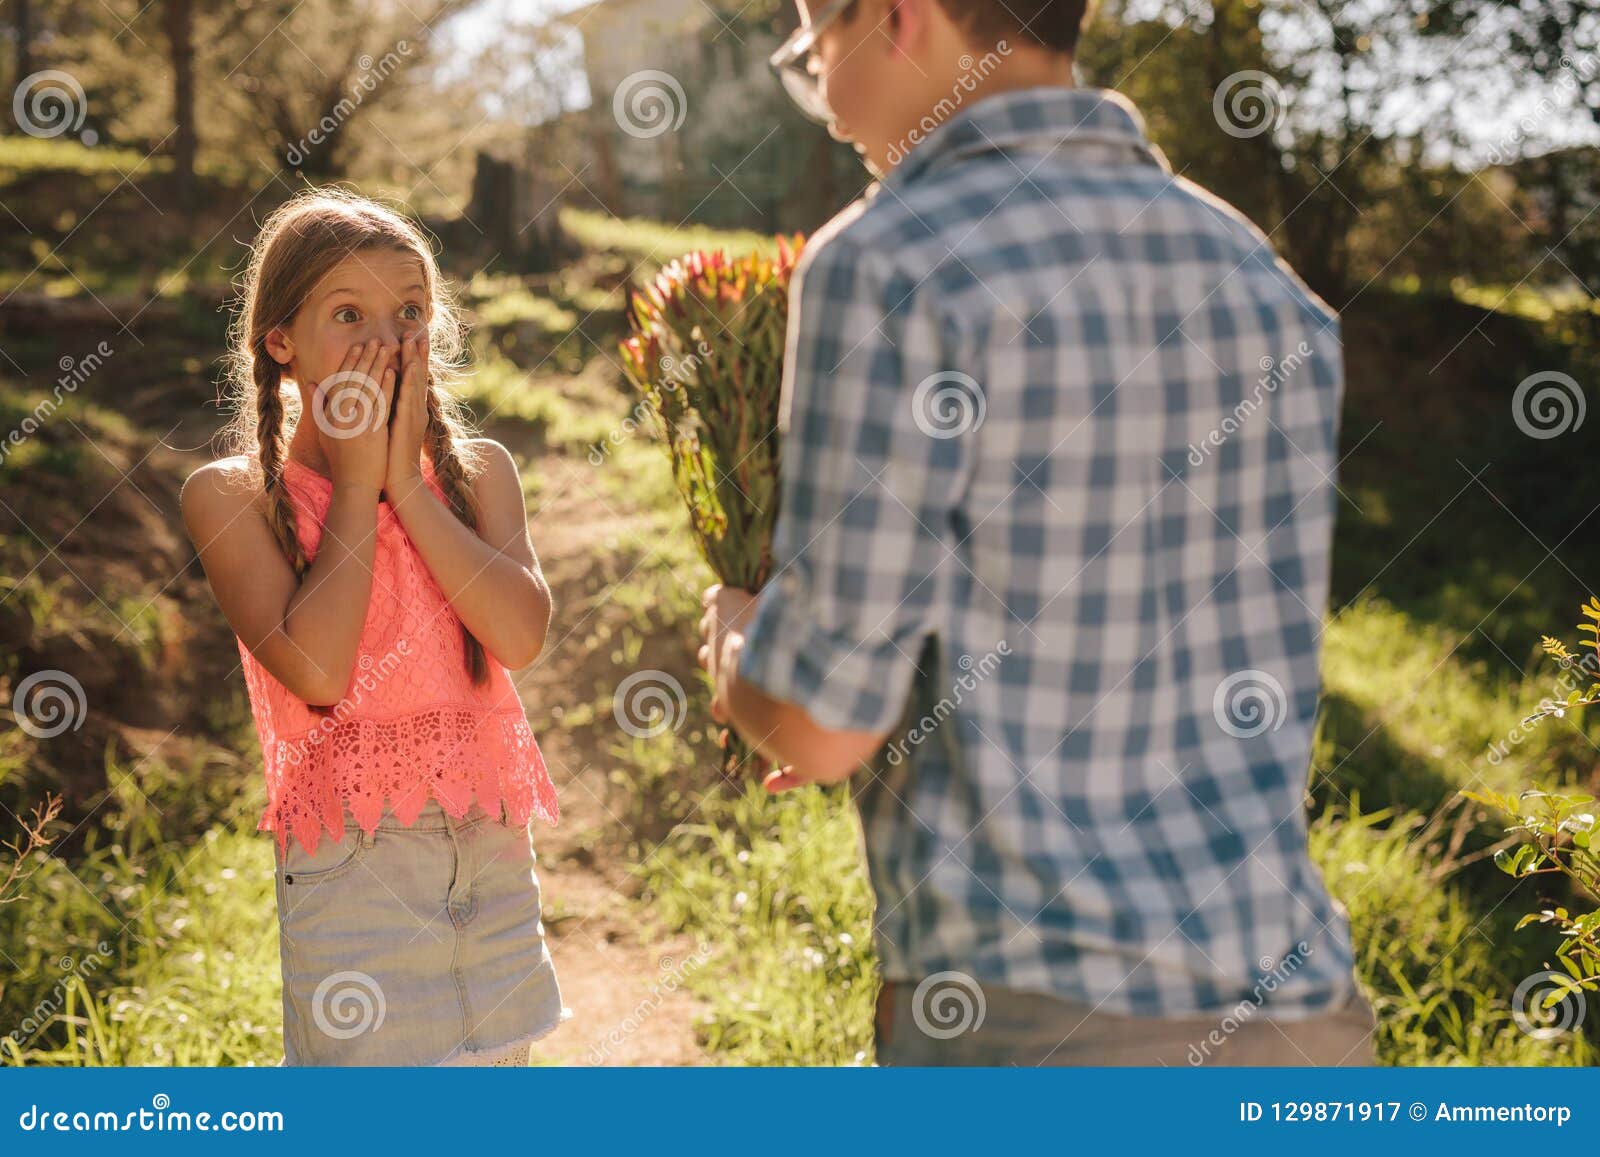 Boy Giving a Bunch of Flowers To His Girlfriend Stock Image ...